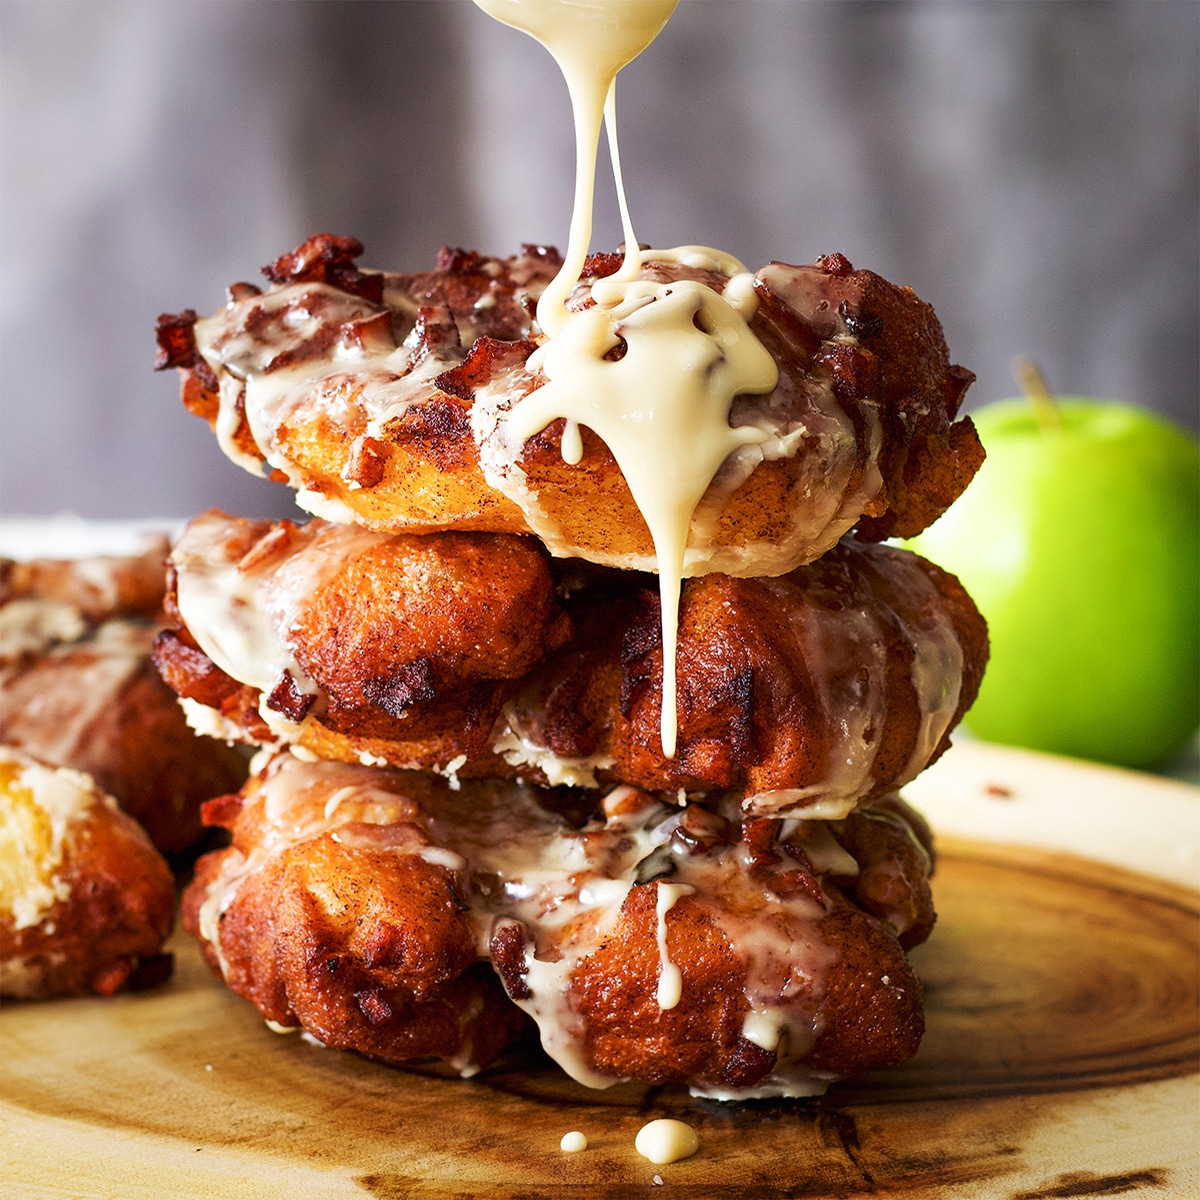 Apple Fritters with Maple Glaze